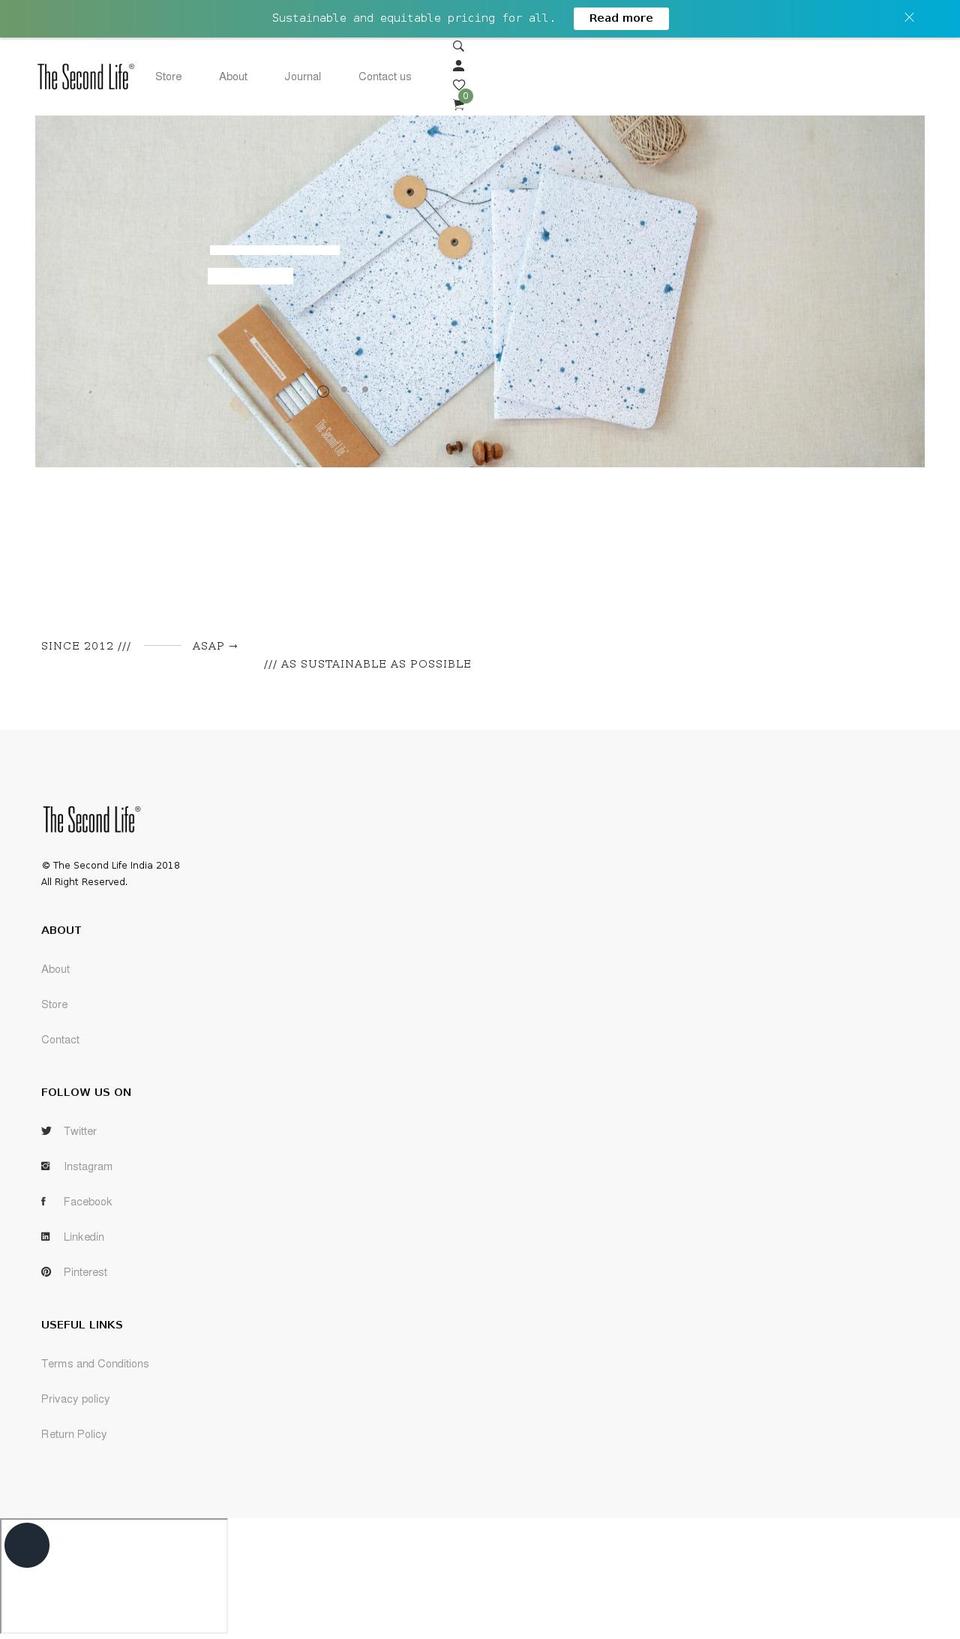 Lezada Shopify theme site example thesecondlife.co